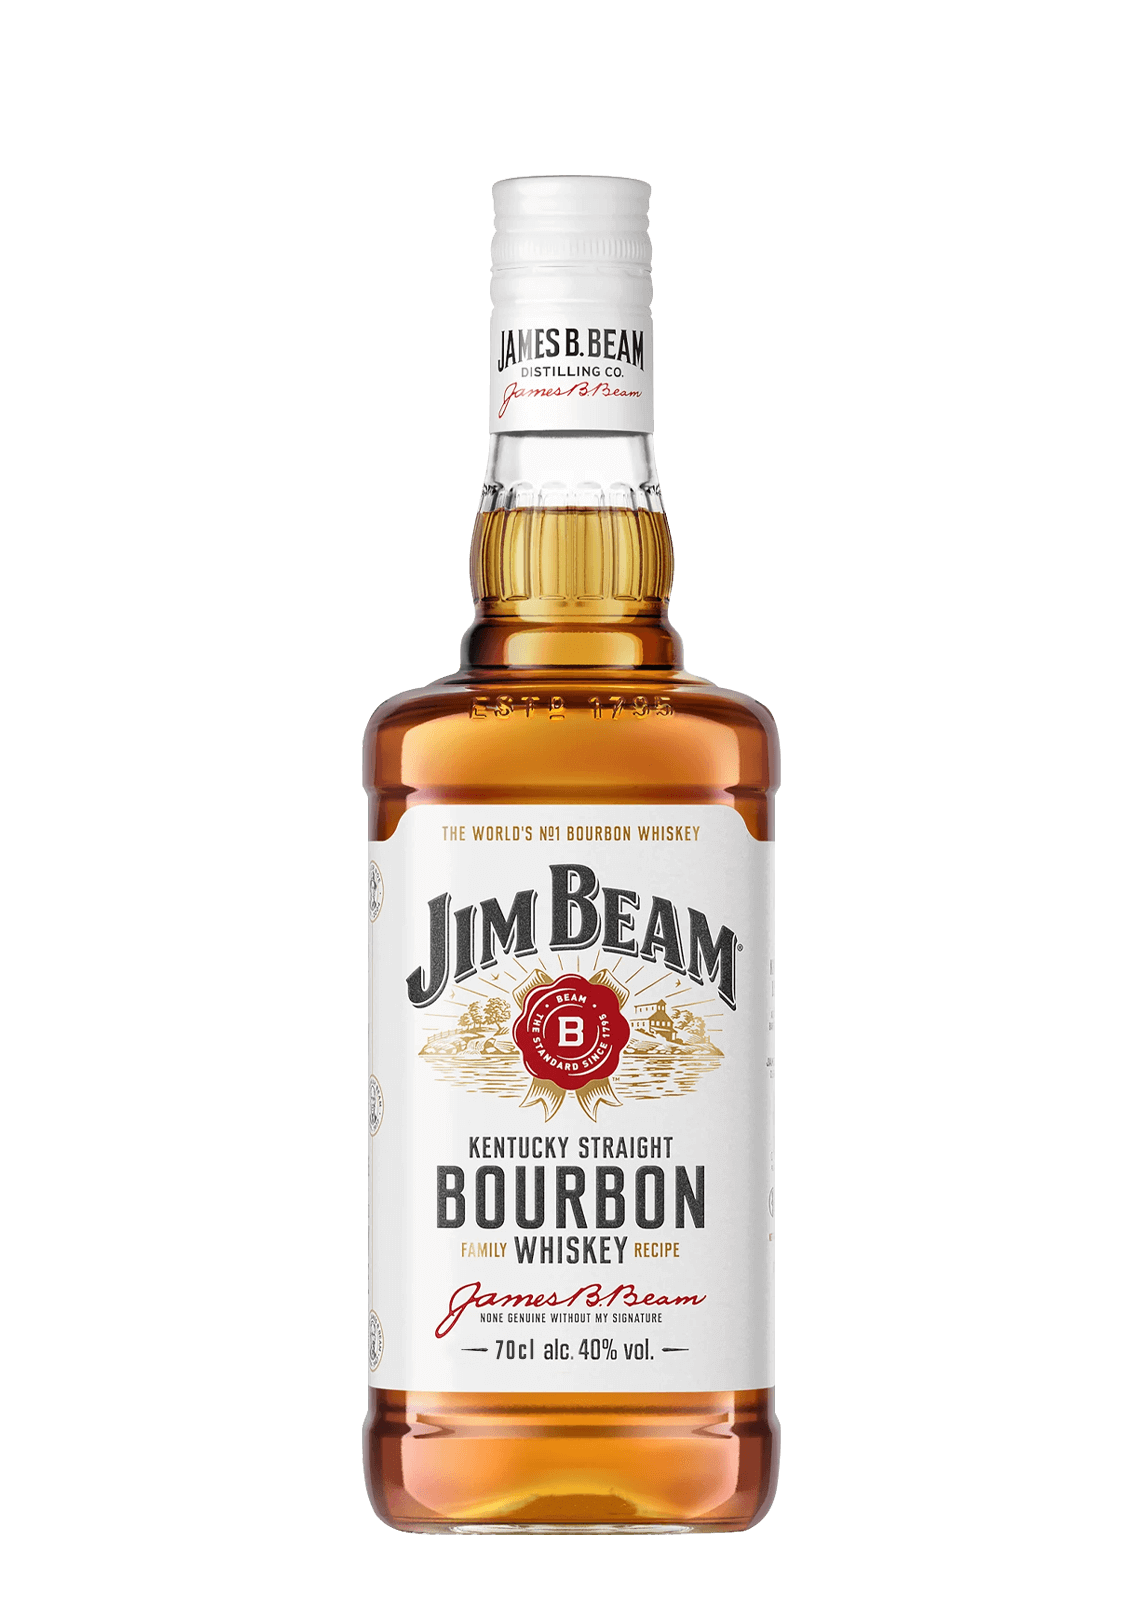 What Is The Best Thing To Mix With Jim Beam Apple : Crisp Apple Ade Cocktail Recipe Jim Beam Apple And Lemonade The Cocktail Project / Jim beam® apple, apple liqueur infused with kentucky straight bourbon whiskey, 35% alc./vol.